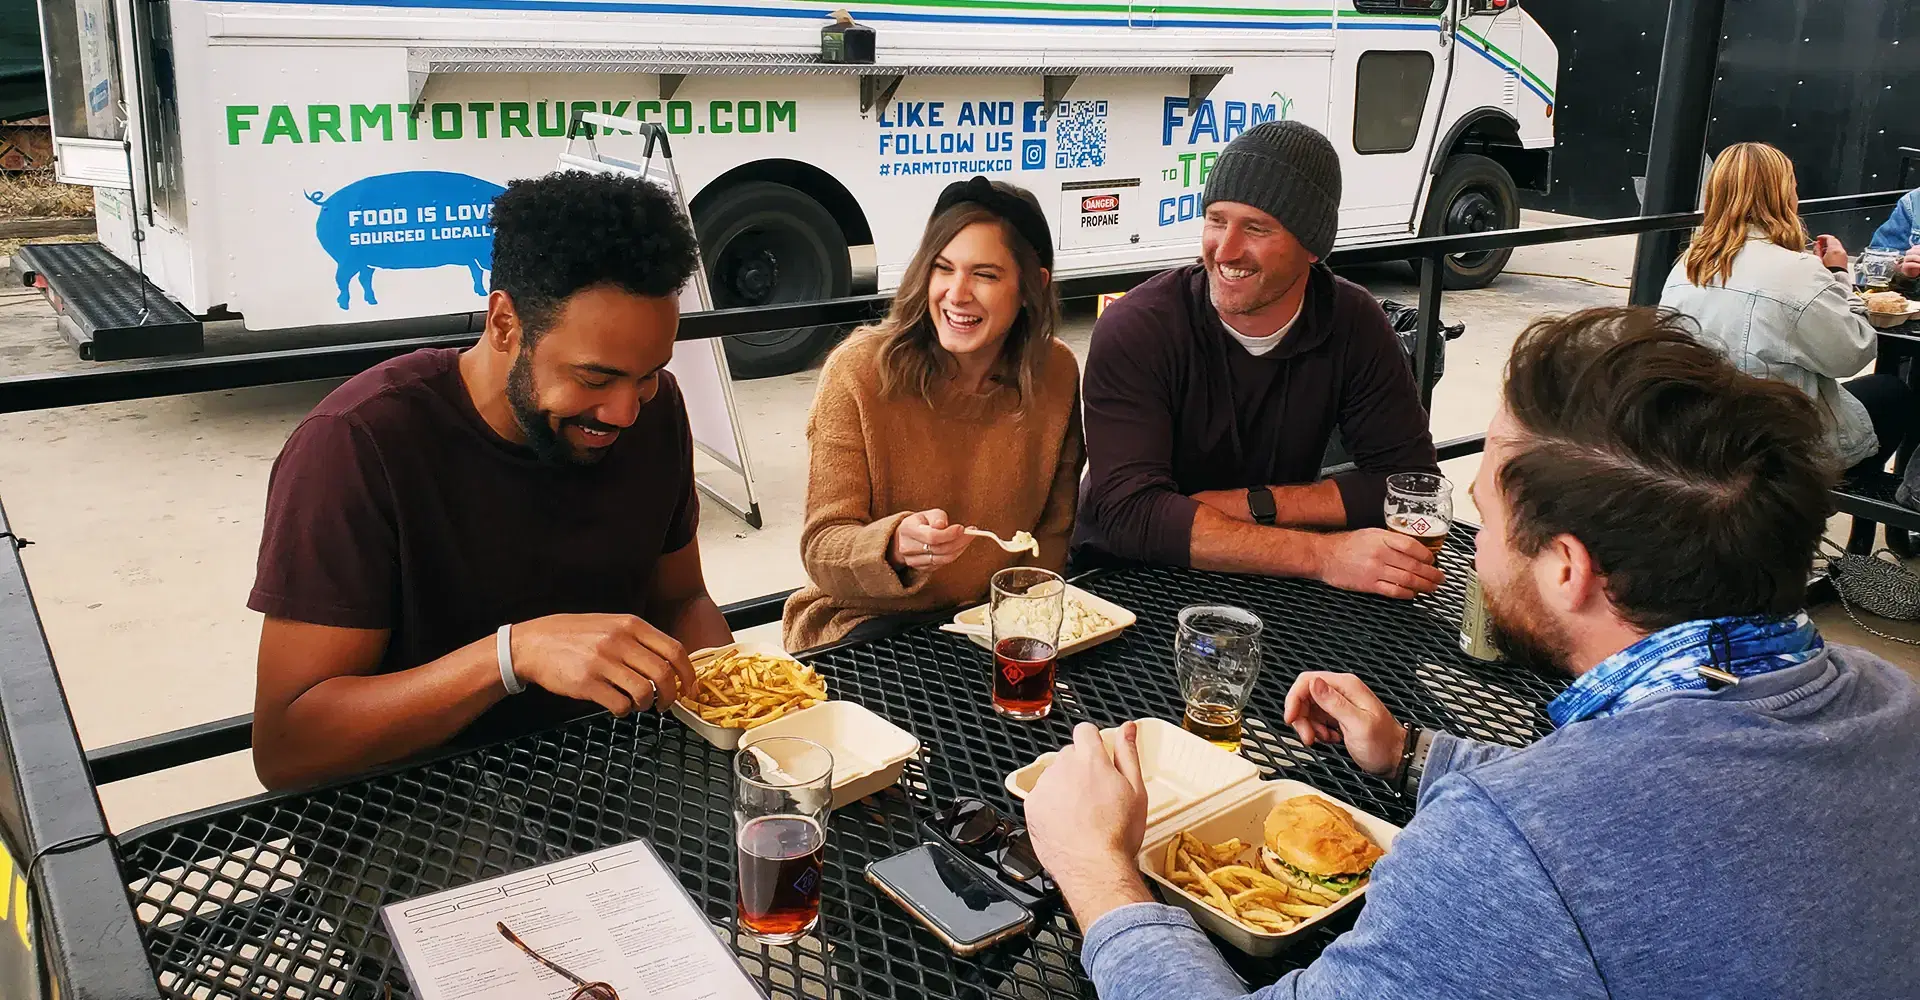 Friends together eating from a food truck at a brewery